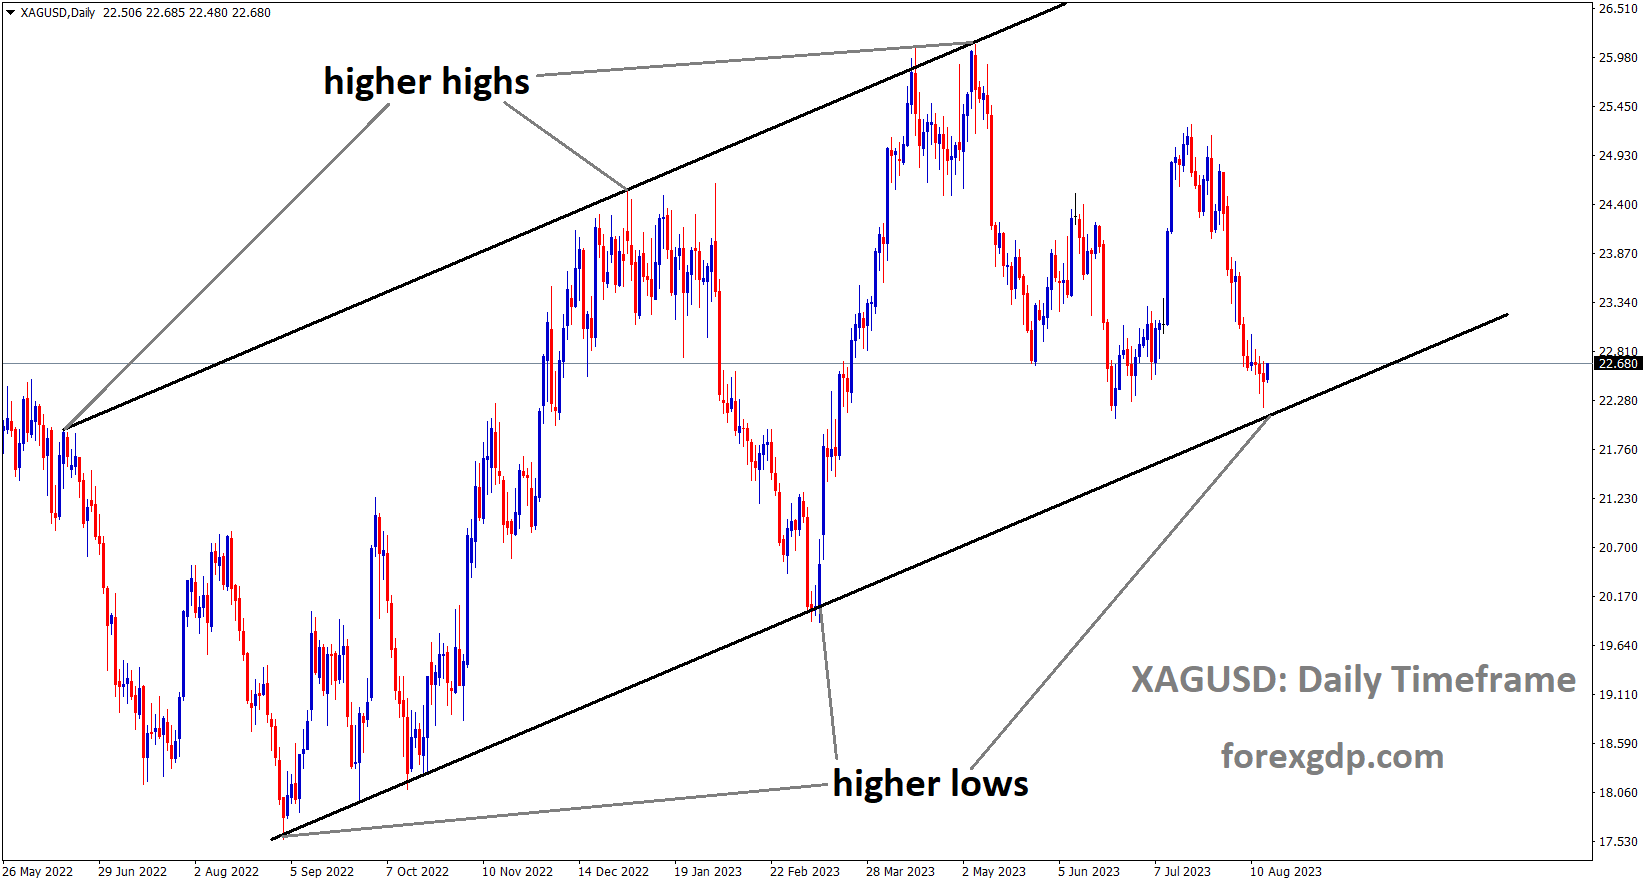 XAGUSD Silver price is moving in an Ascending channel and the market has reached the higher low area of the channel